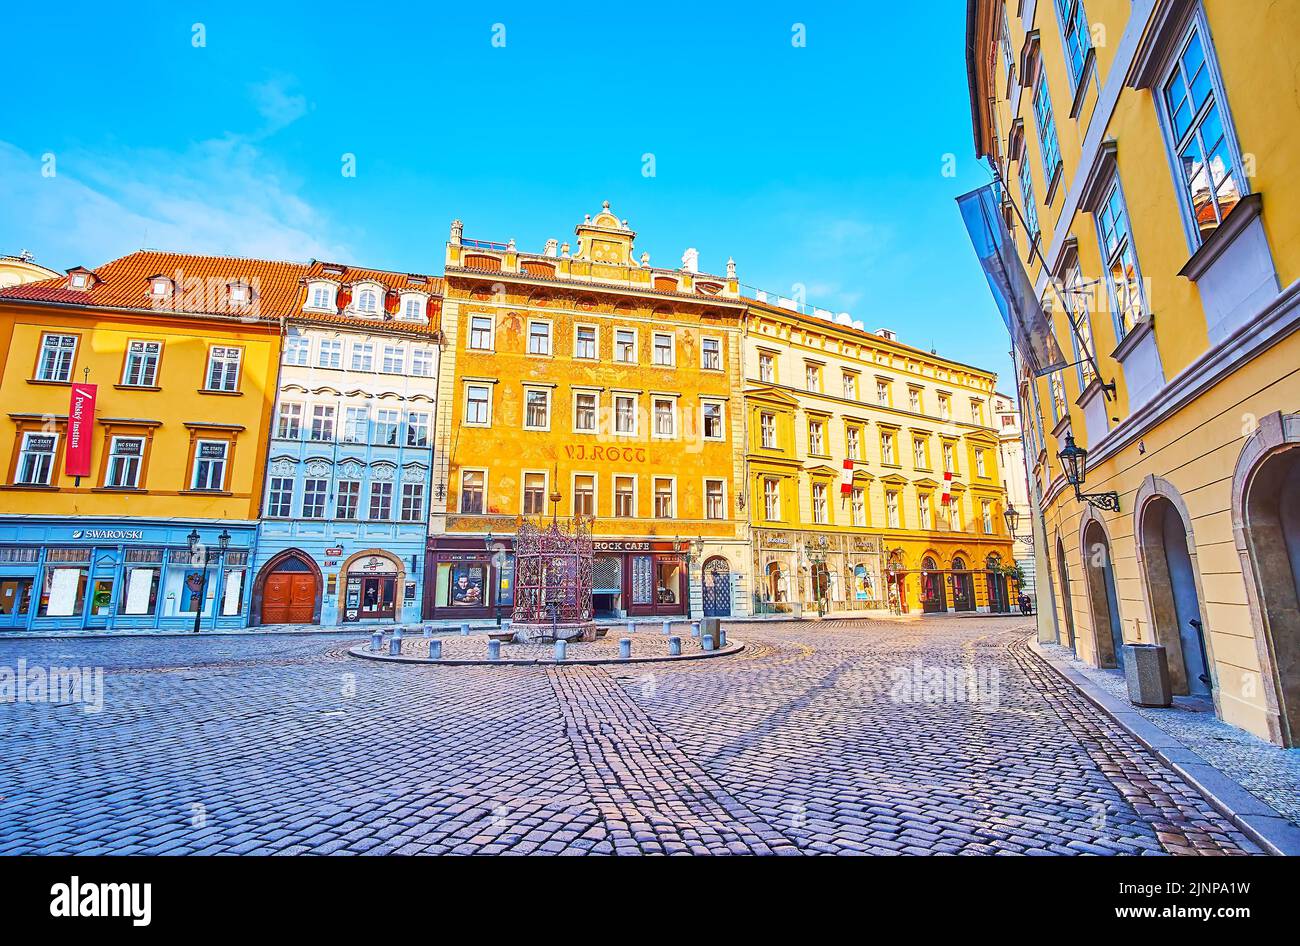 PRAGUE, CZECH REPUBLIC - MARCH 6, 2022: The beautiful mansions and frescoed U Rotta House on Little Square of Stare Mesto (Old Town) district, on Marc Stock Photo